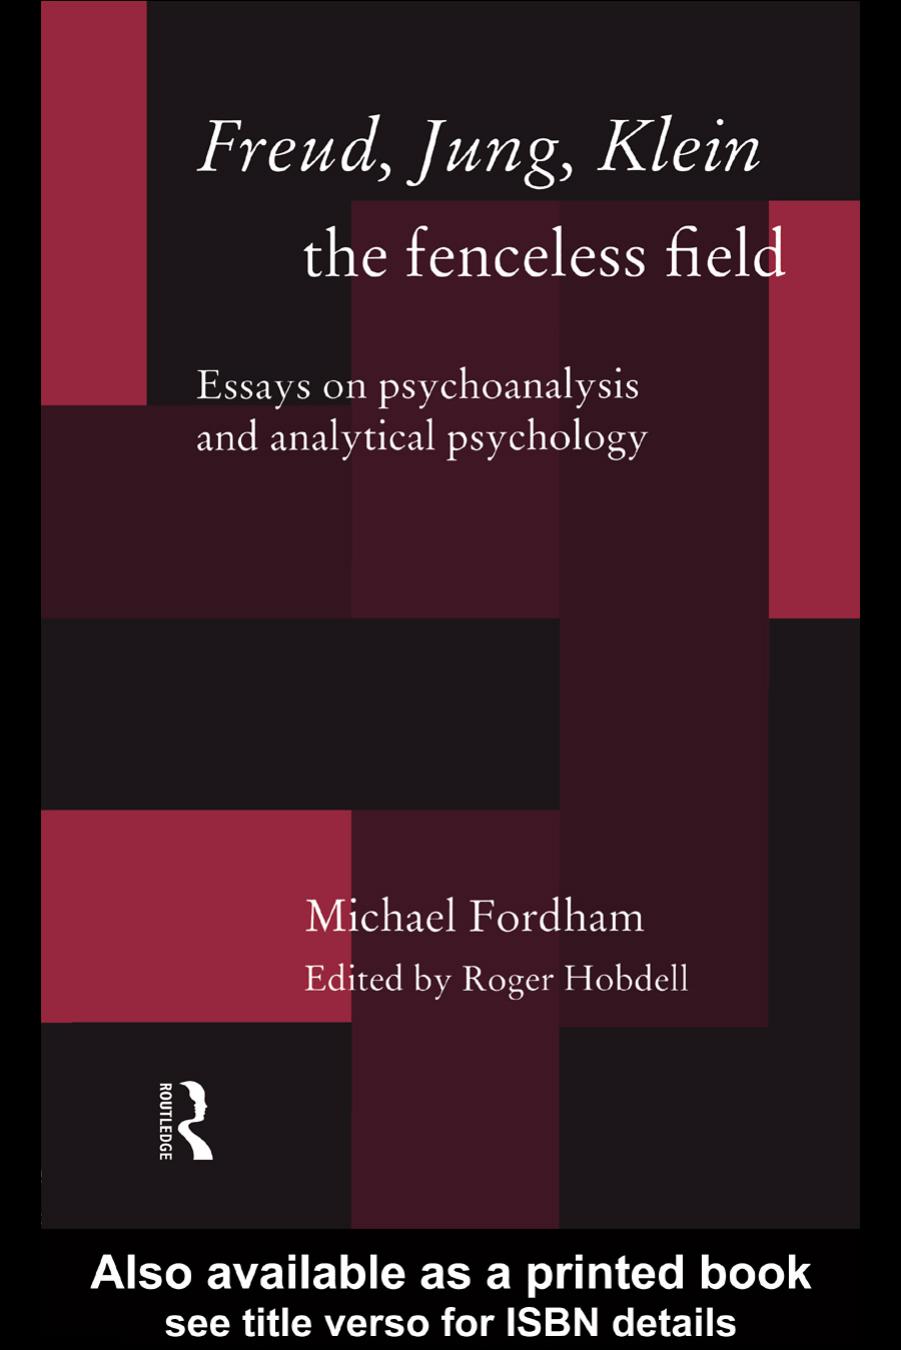 Freud, Jung, Klein - the Fenceless Field: Essays on Psychoanalysis and Analytical Psychology